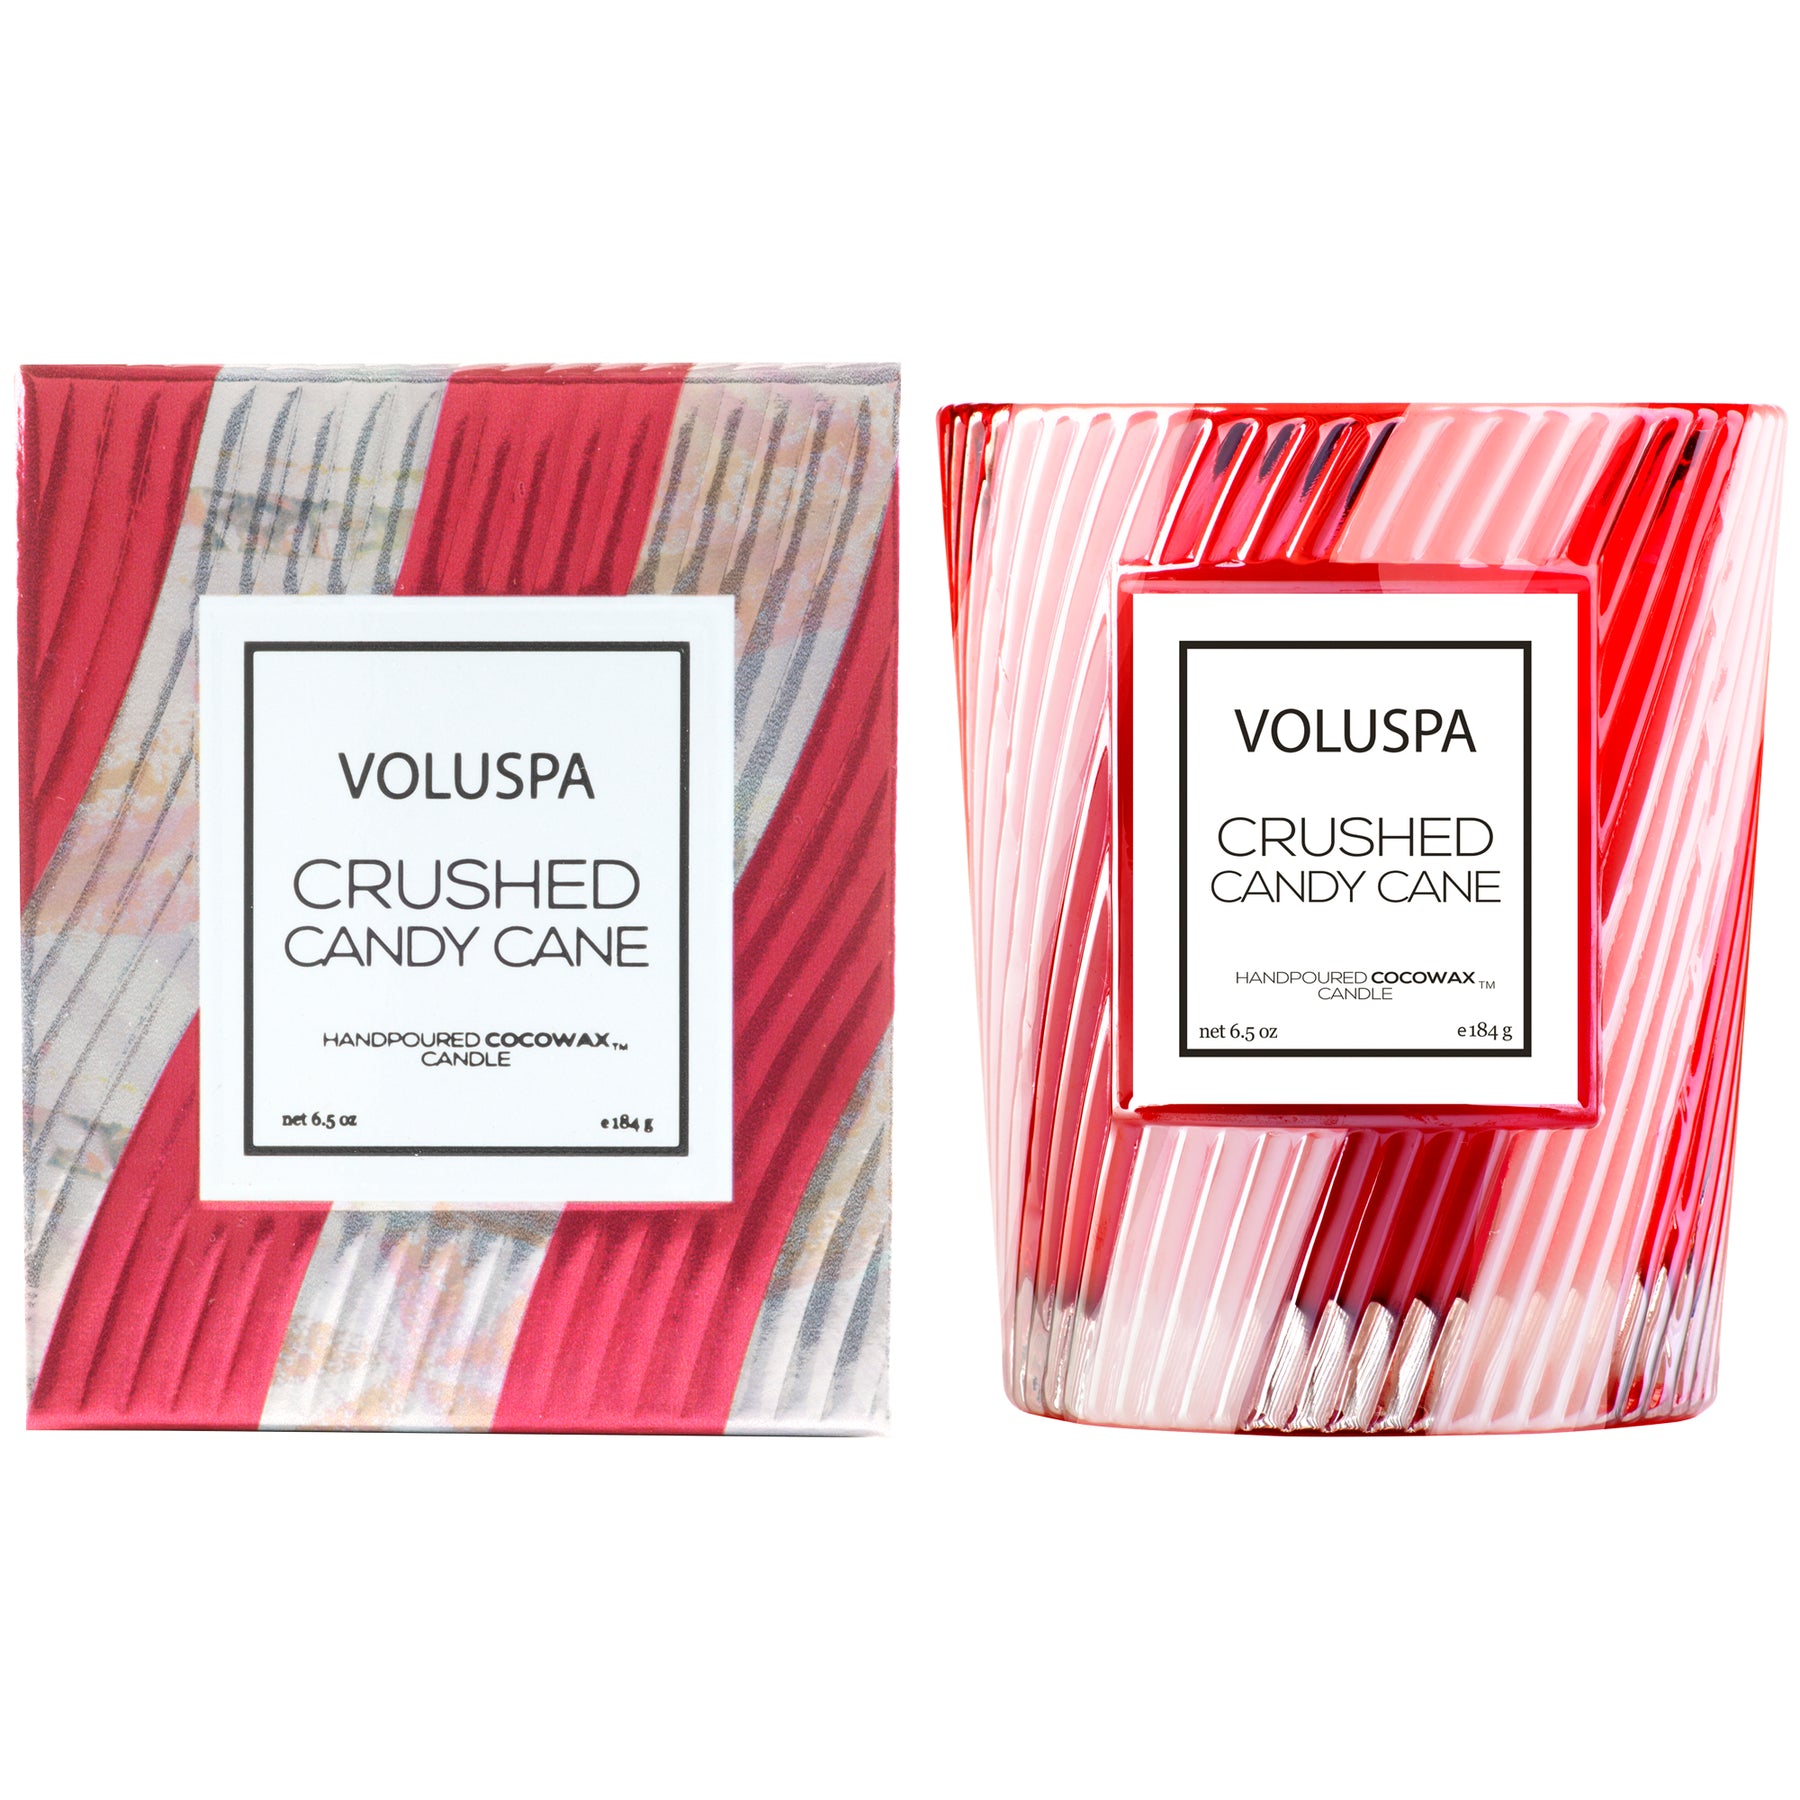 Crushed Candy Cane - Limited Edition Classic Candle